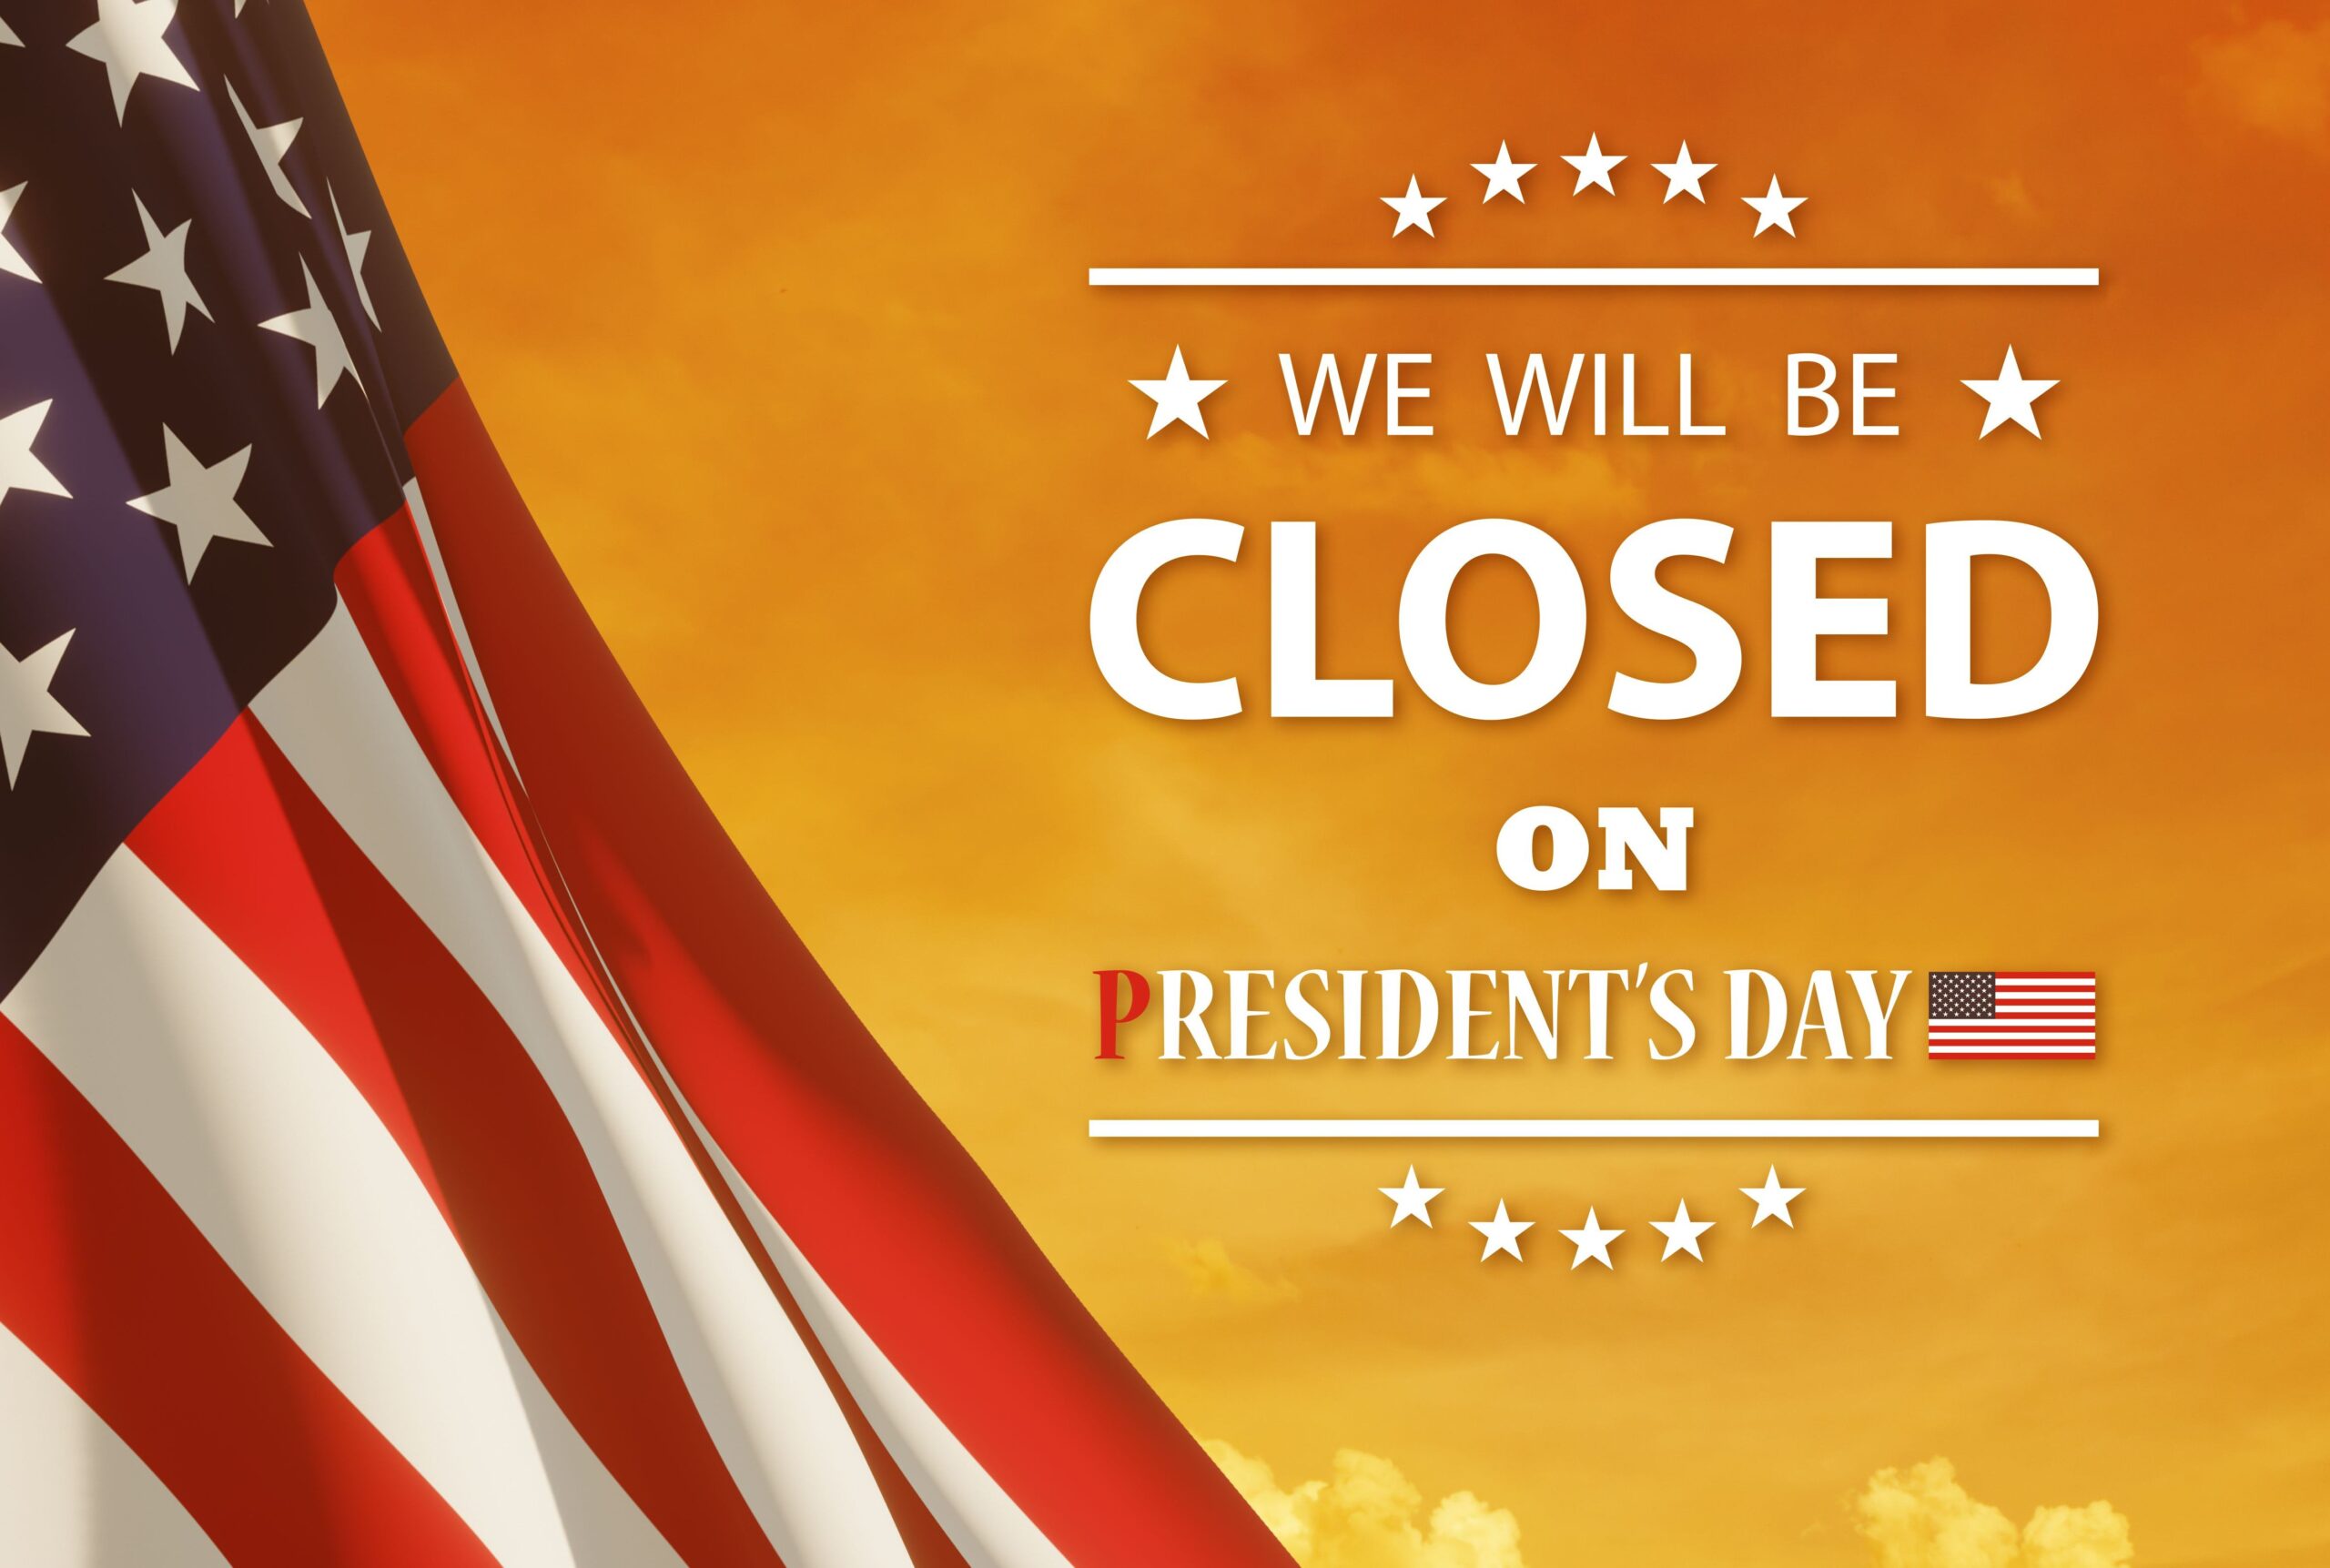 Presidents' Day Bank Closed February 19th BankCherokee